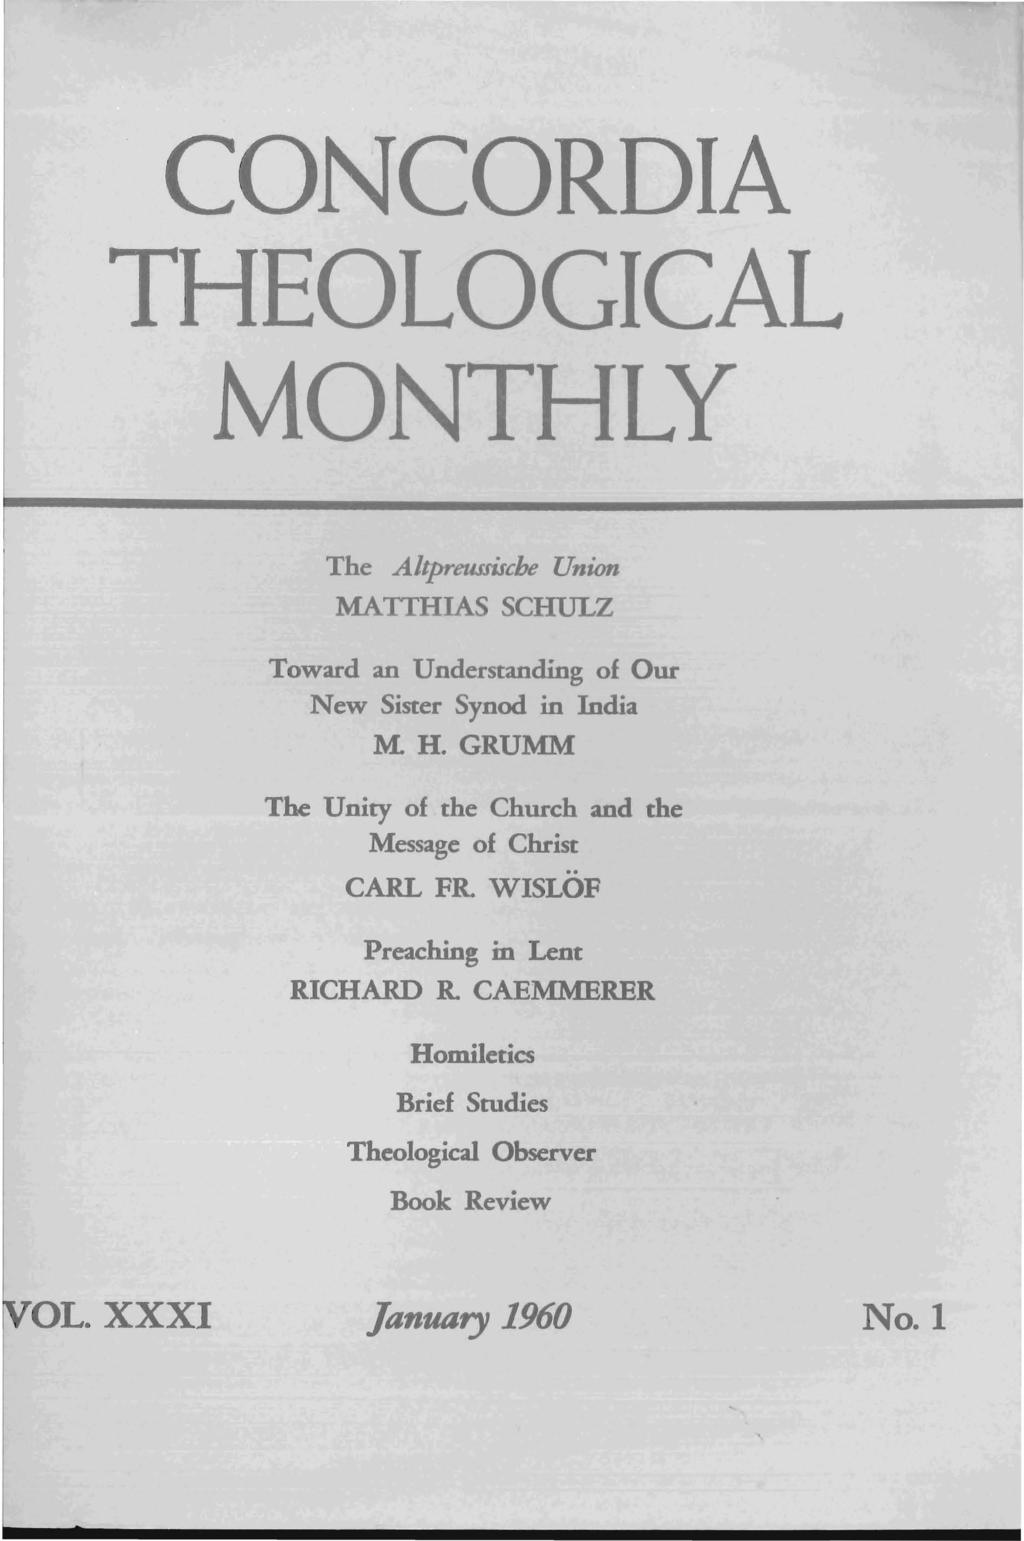 CONCORDIA THEOLOGICAL MONTHLY The Altpreussiscbe Union MATTHIAS SCHULZ Toward an Understanding of Our New Sister Synod in India M H.